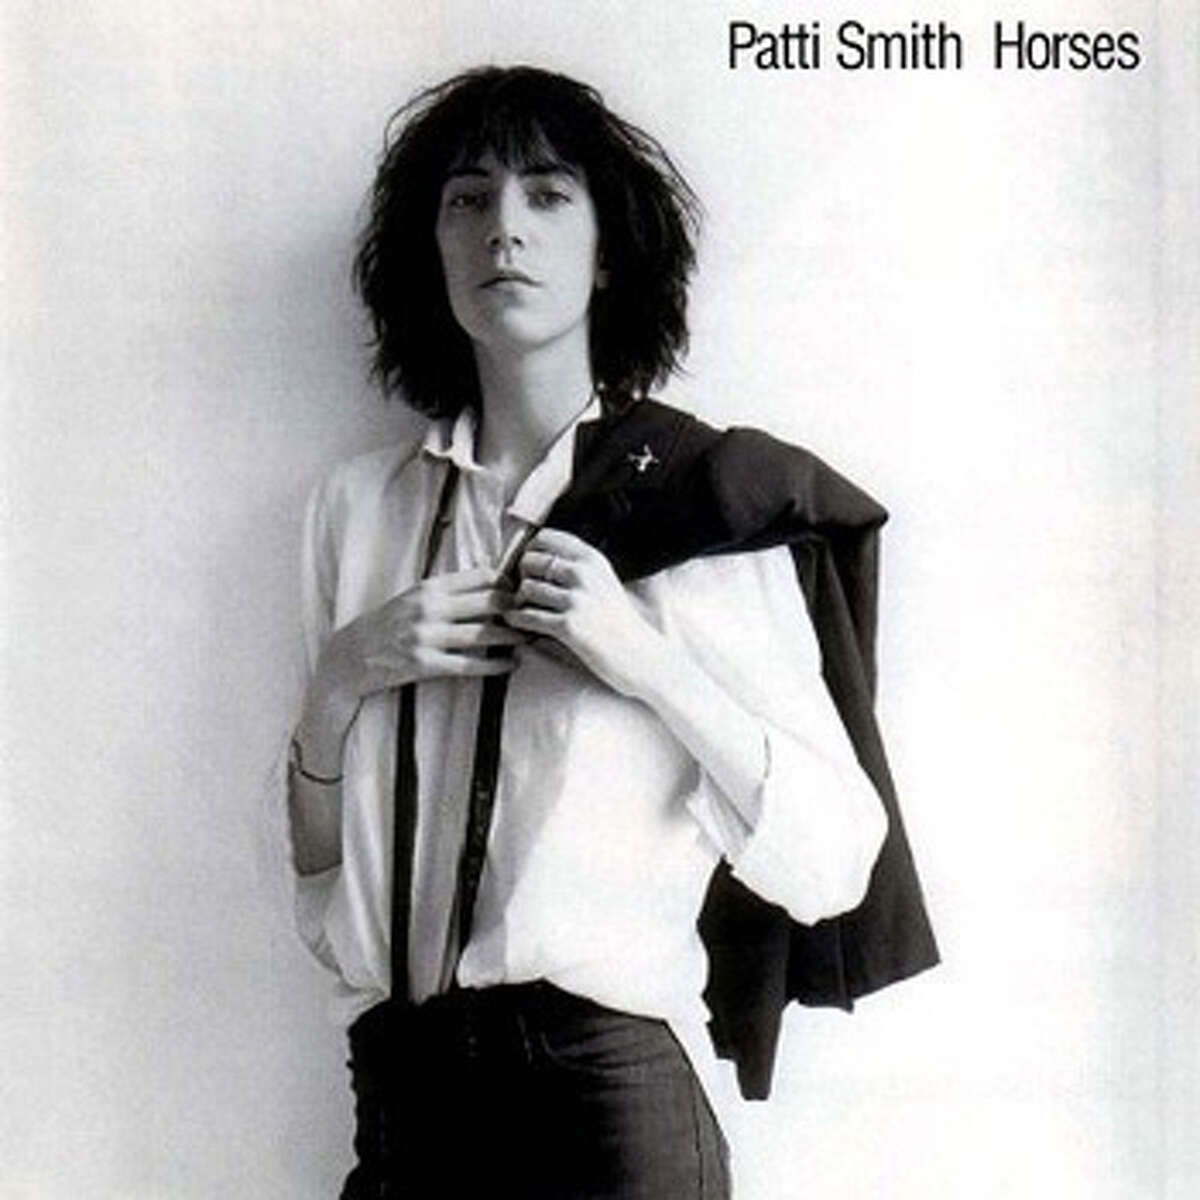 Patti Smith, 'Horses' (1975): She turns Van Morrison's "Gloria" inside out and spouts poetry over punk rock with a jacket tossed over her shoulder.